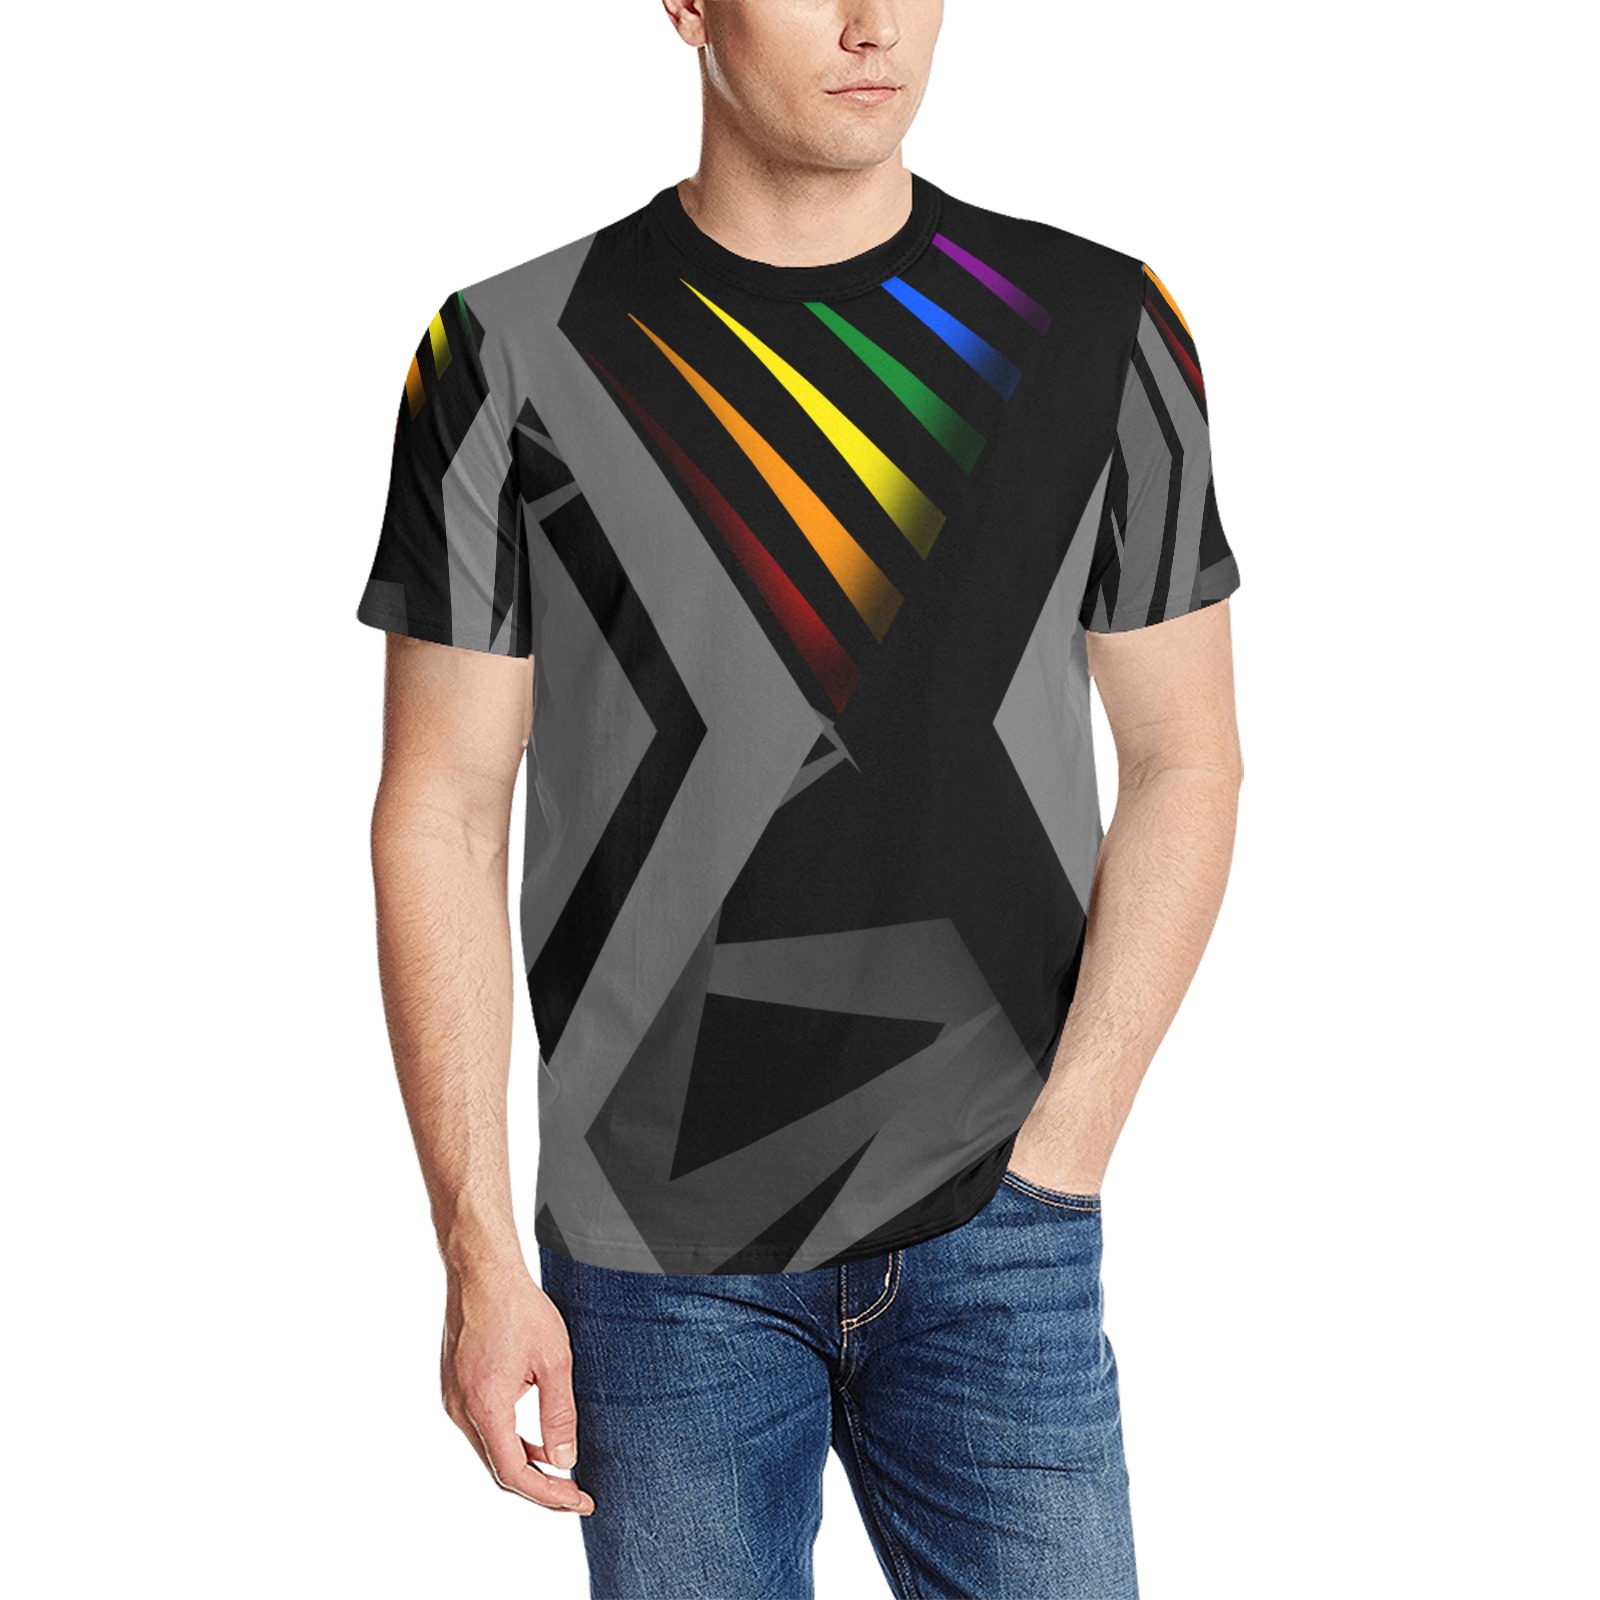 Black Gray and Colorful Claws Men's All Over Print T-Shirt (Solid Color Neck) (Model T63)